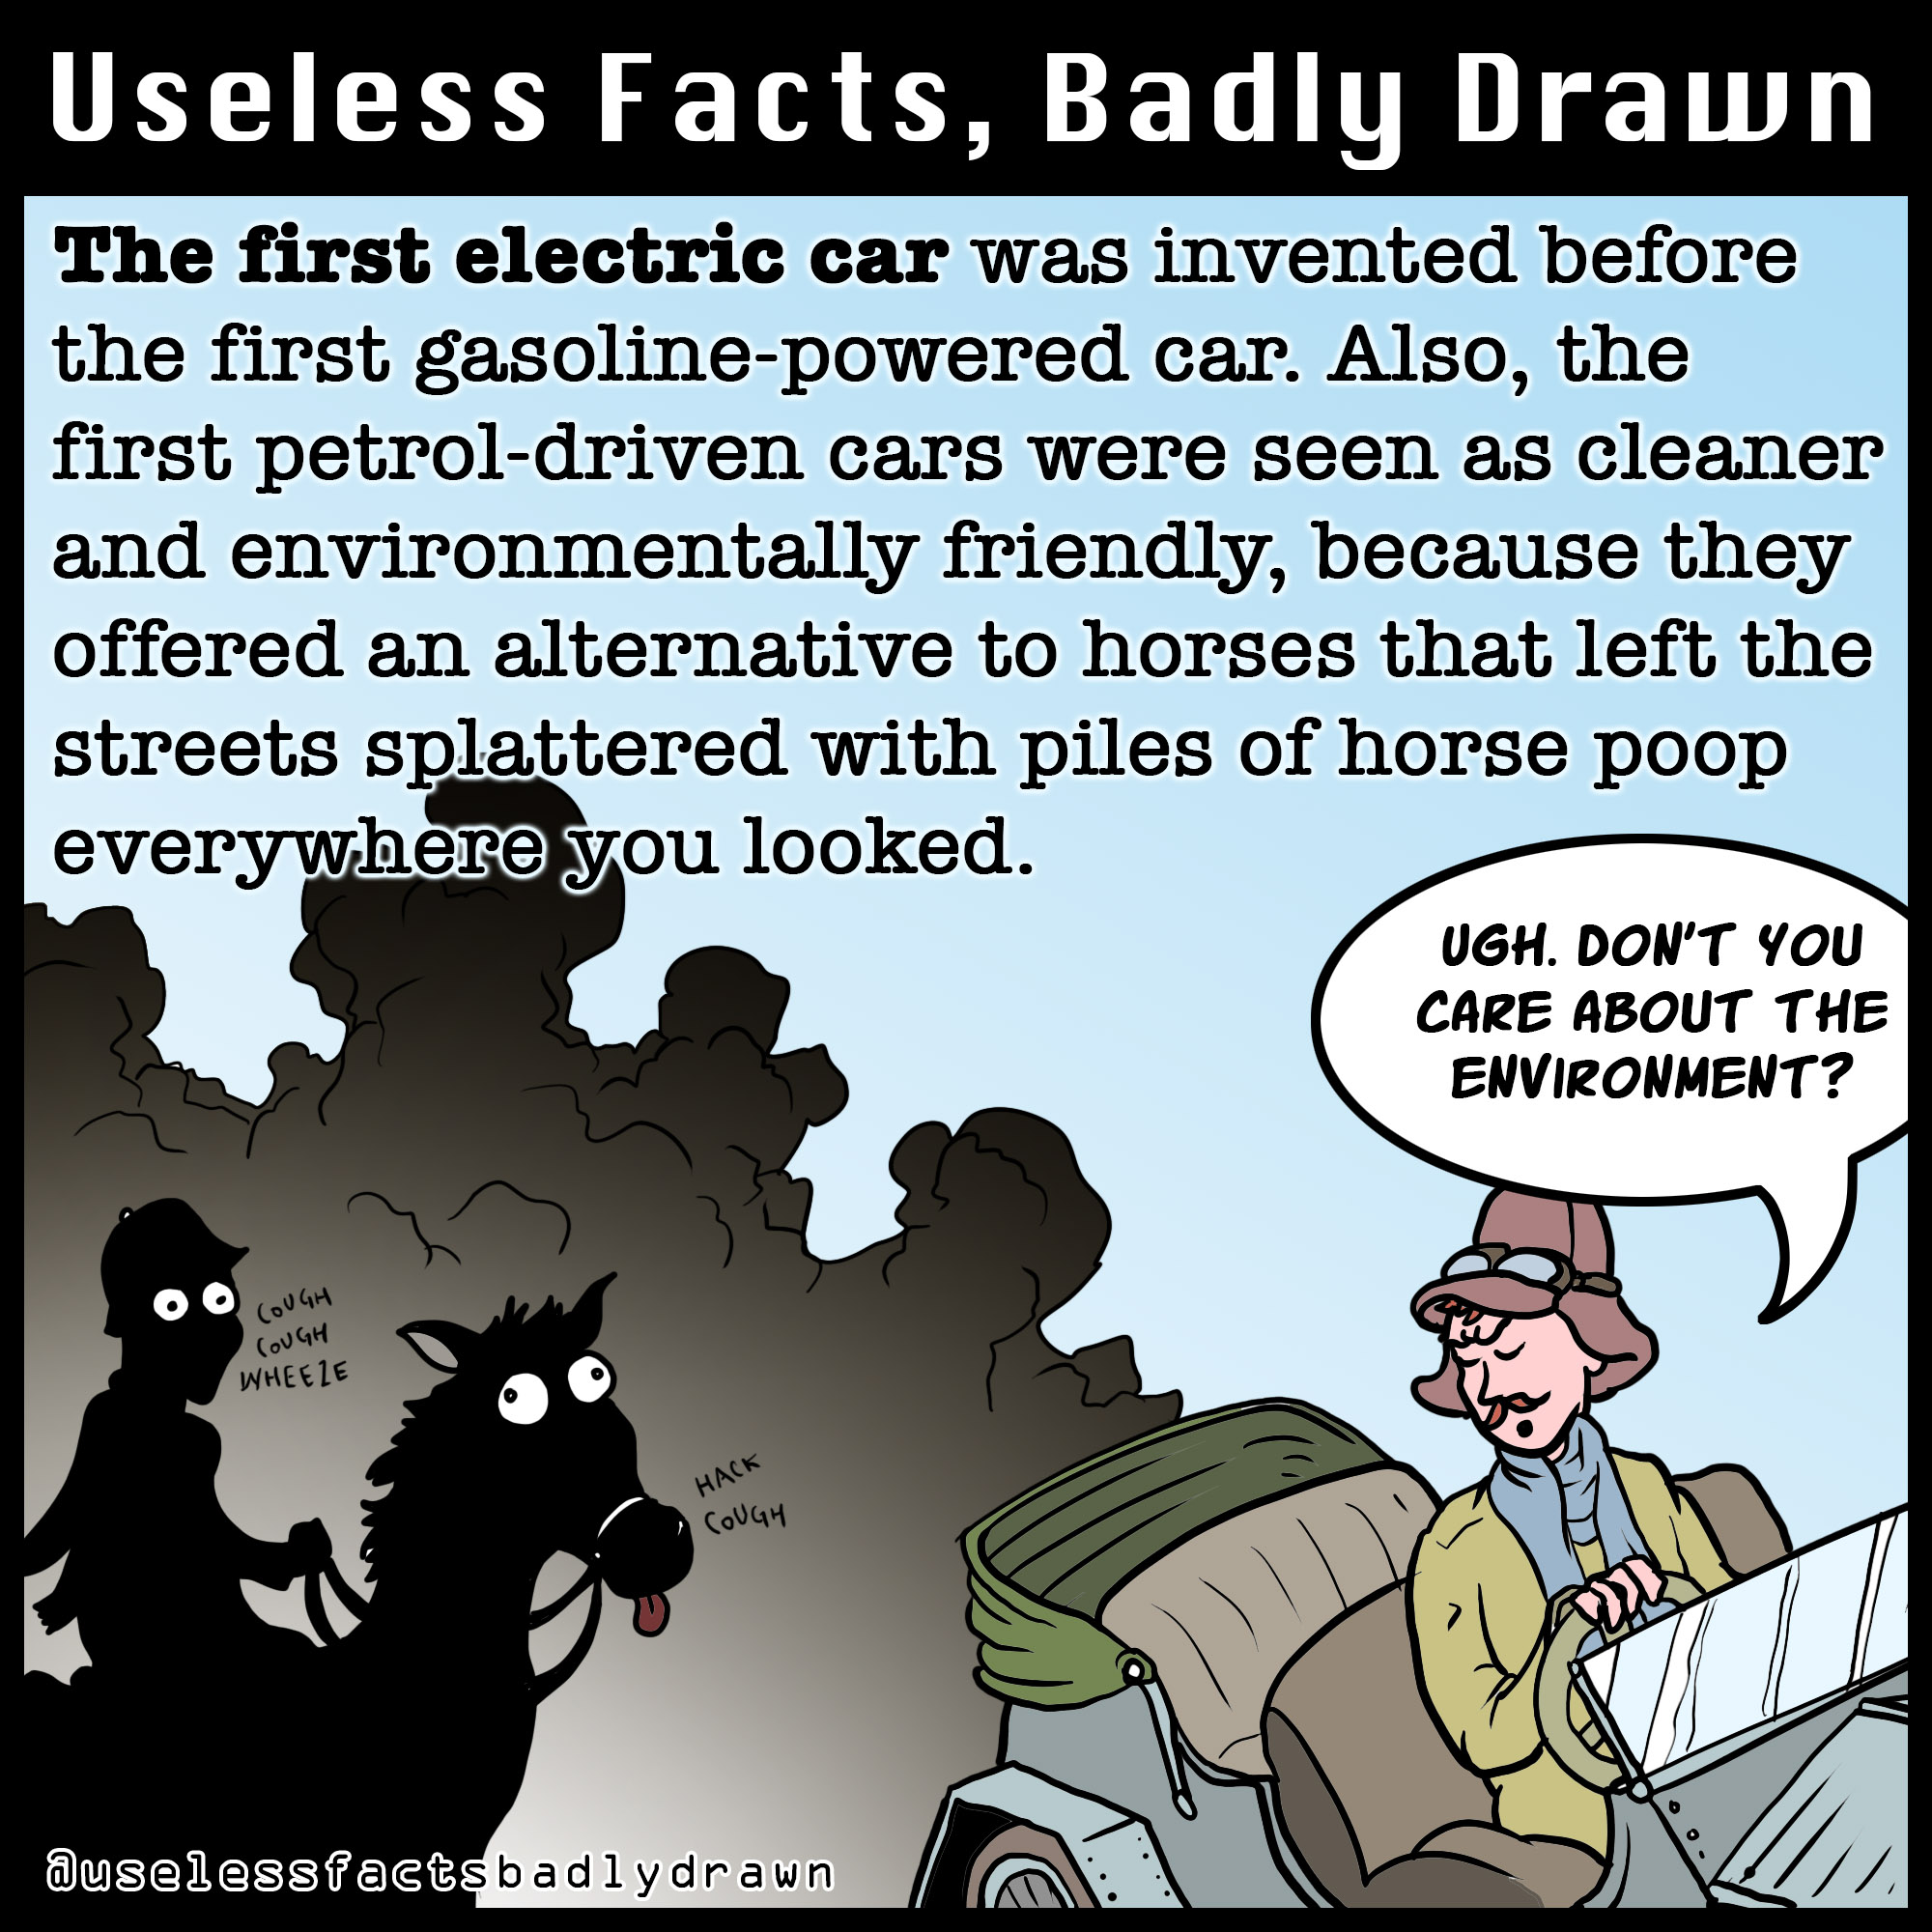 cartoon - Useless Facts, Badly Drawn The first electric car was invented before the first gasolinepowered car. Also, the first petroldriven cars were seen as cleaner and environmentally friendly, because they offered an alternative to horses that left the